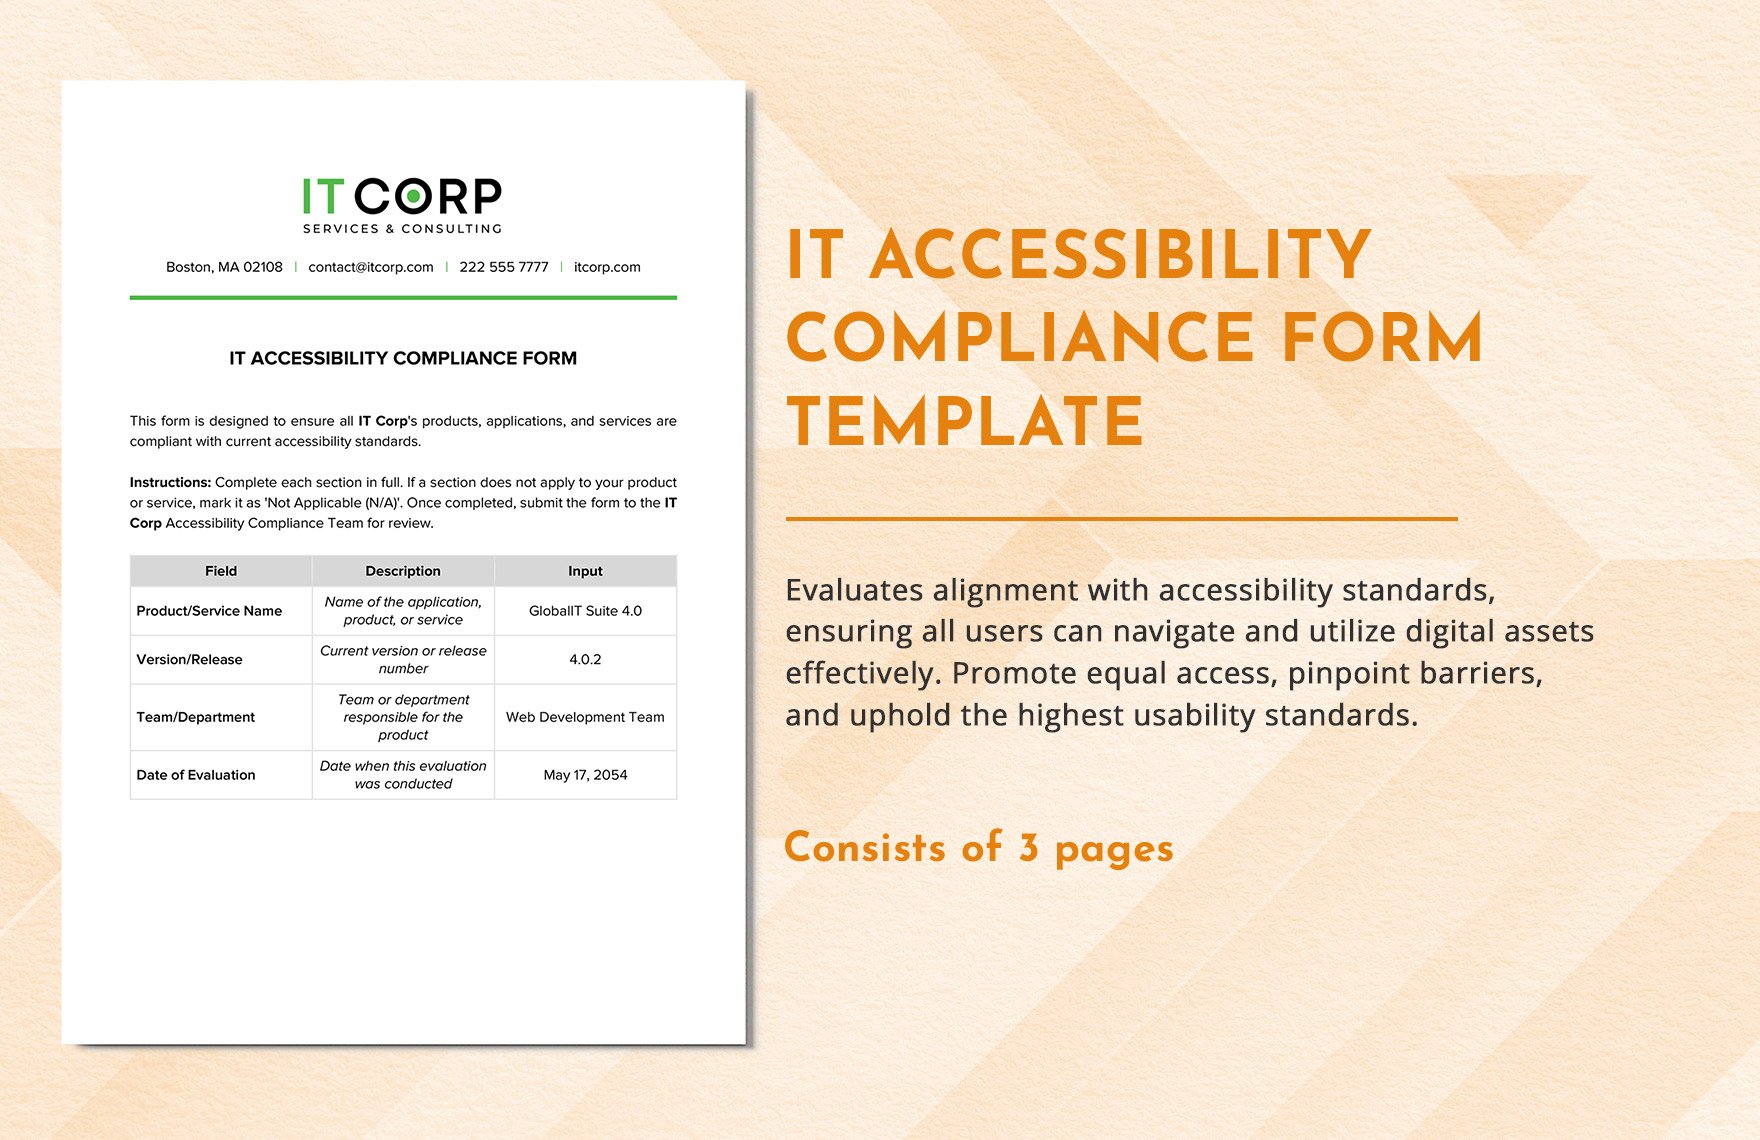 IT Accessibility Compliance Form Template in Word, Google Docs, PDF